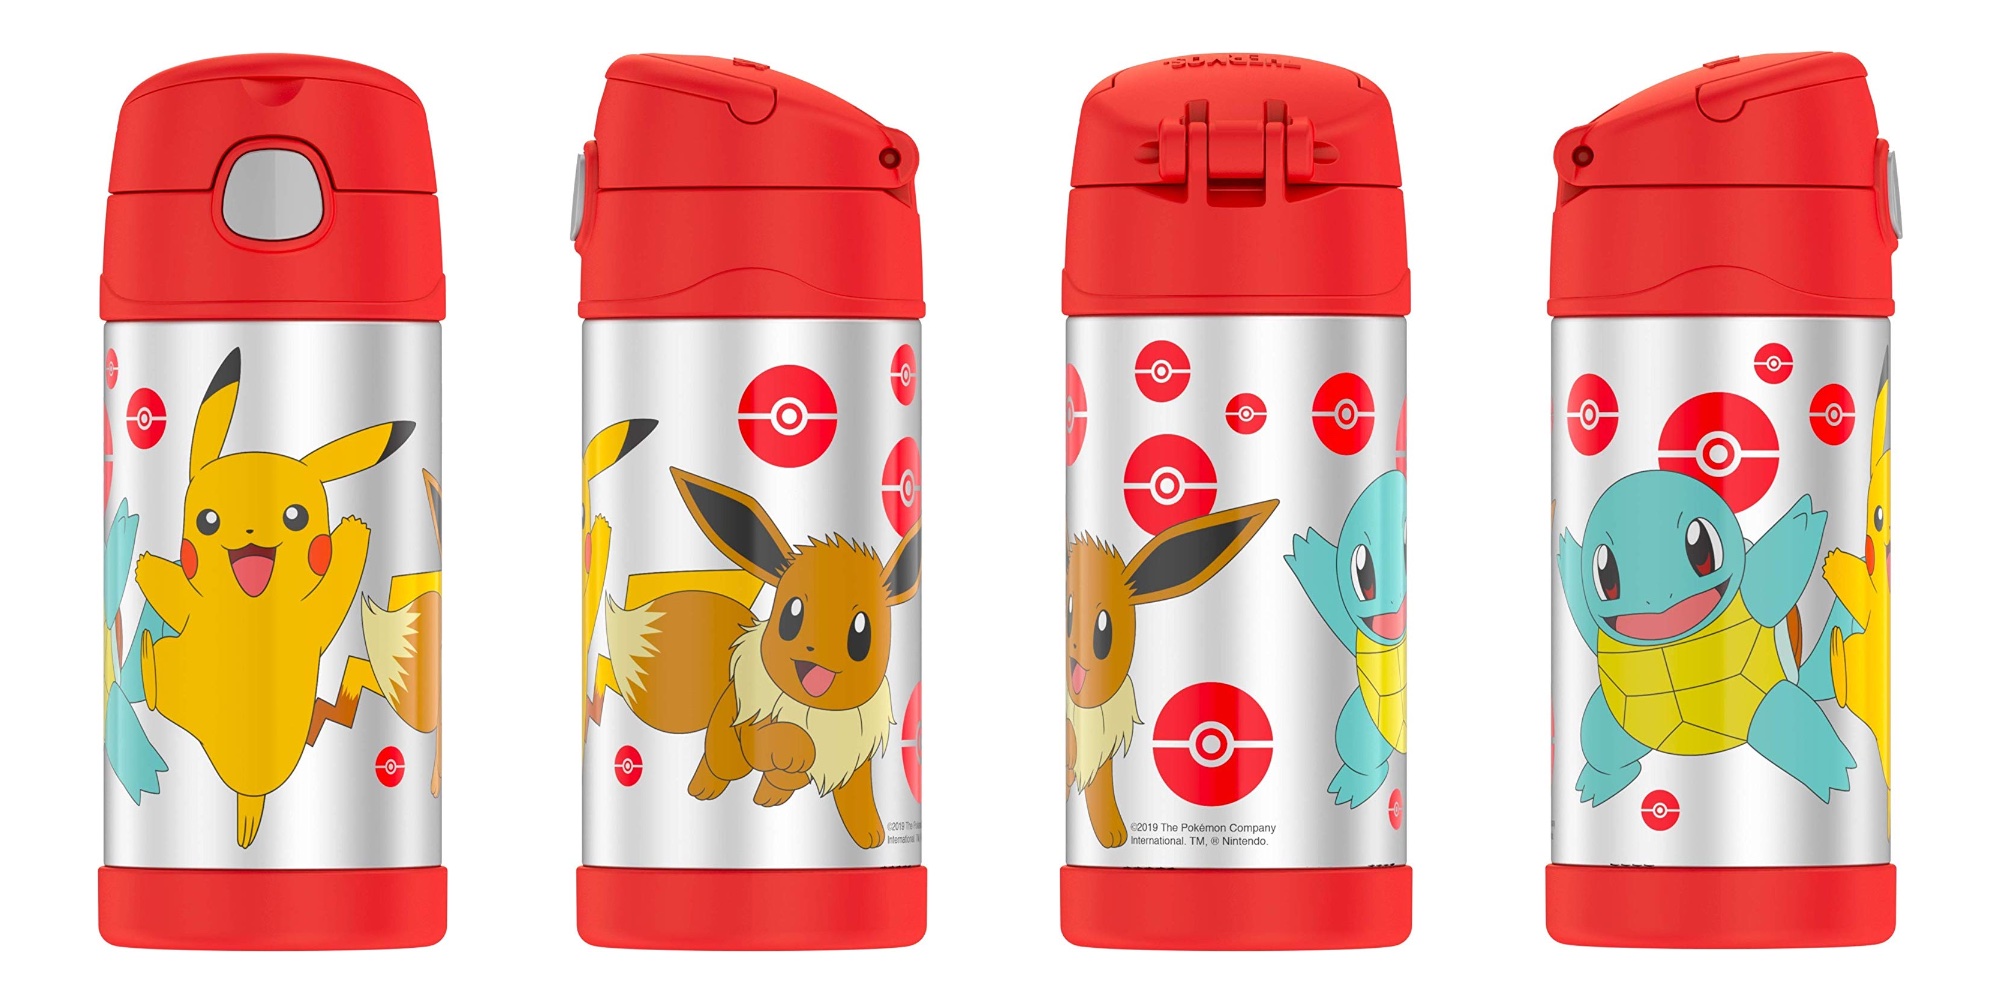 https://9to5toys.com/wp-content/uploads/sites/5/2019/07/Thermos-Funtainer-Pok%C3%A9mon-Insulated-Bottle.jpg